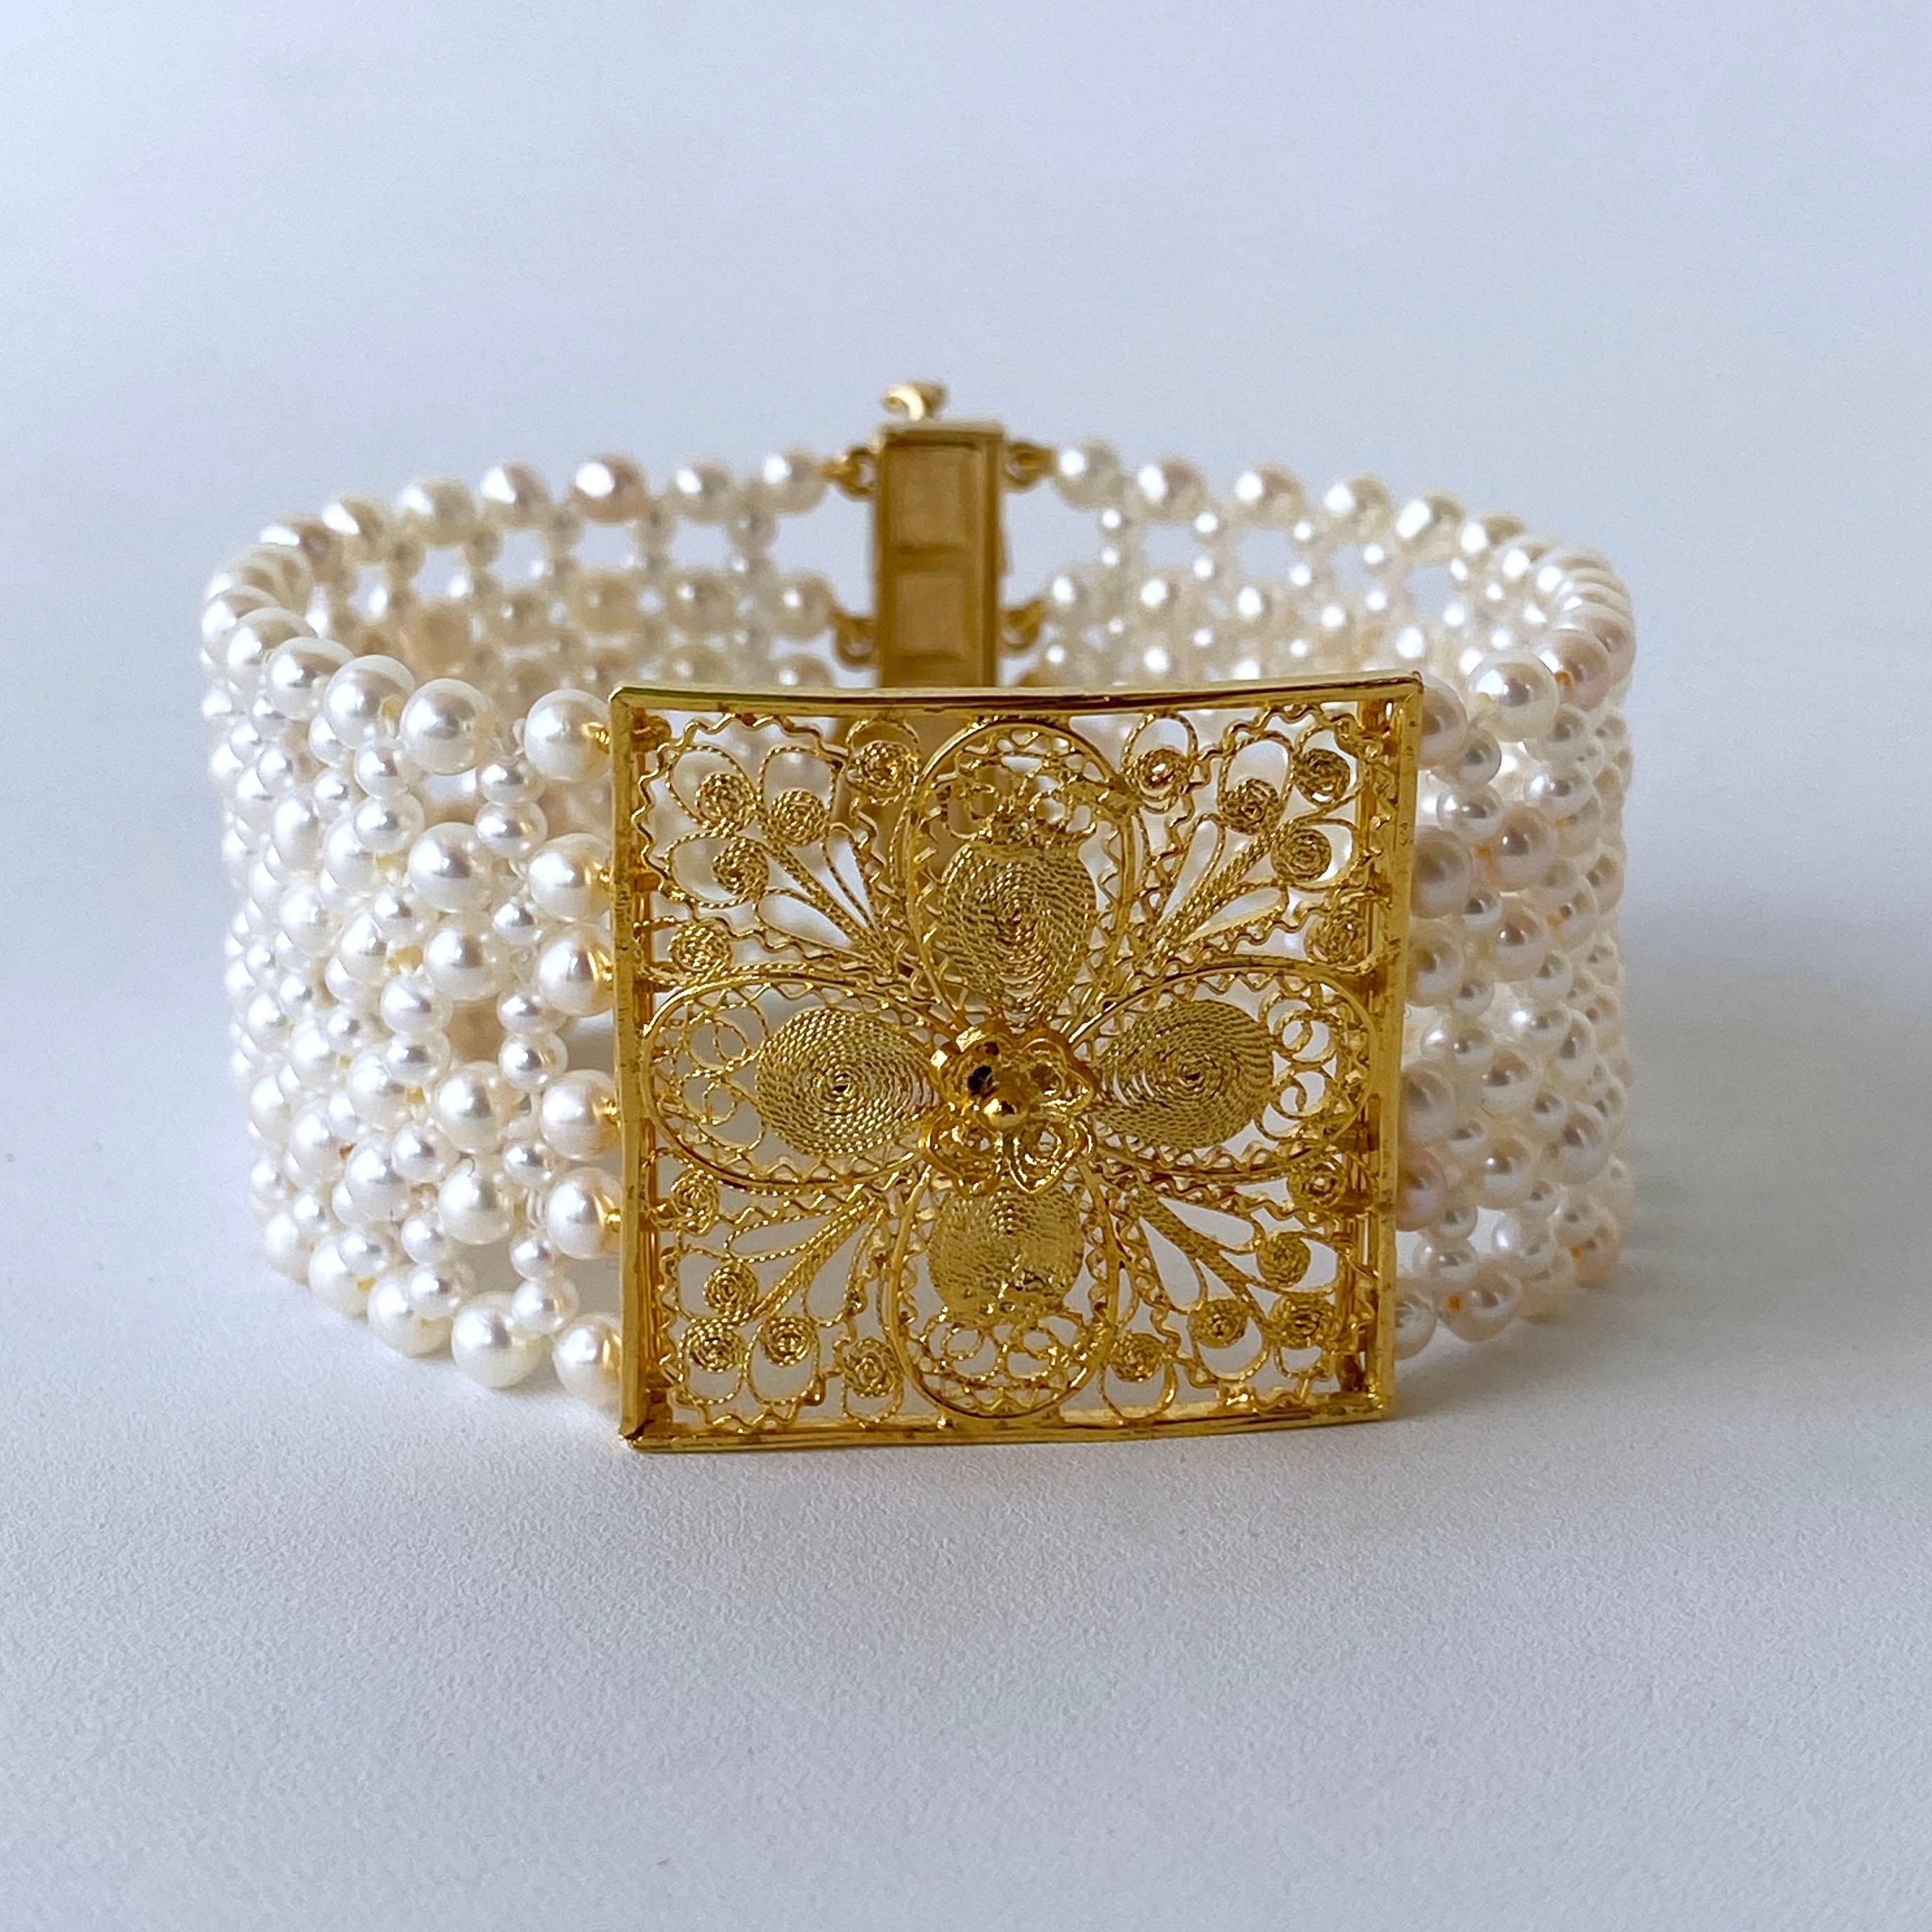 Marina J. Woven Pearl Bracelet with 18k Yellow Gold Floral Centerpiece & Clasp 2